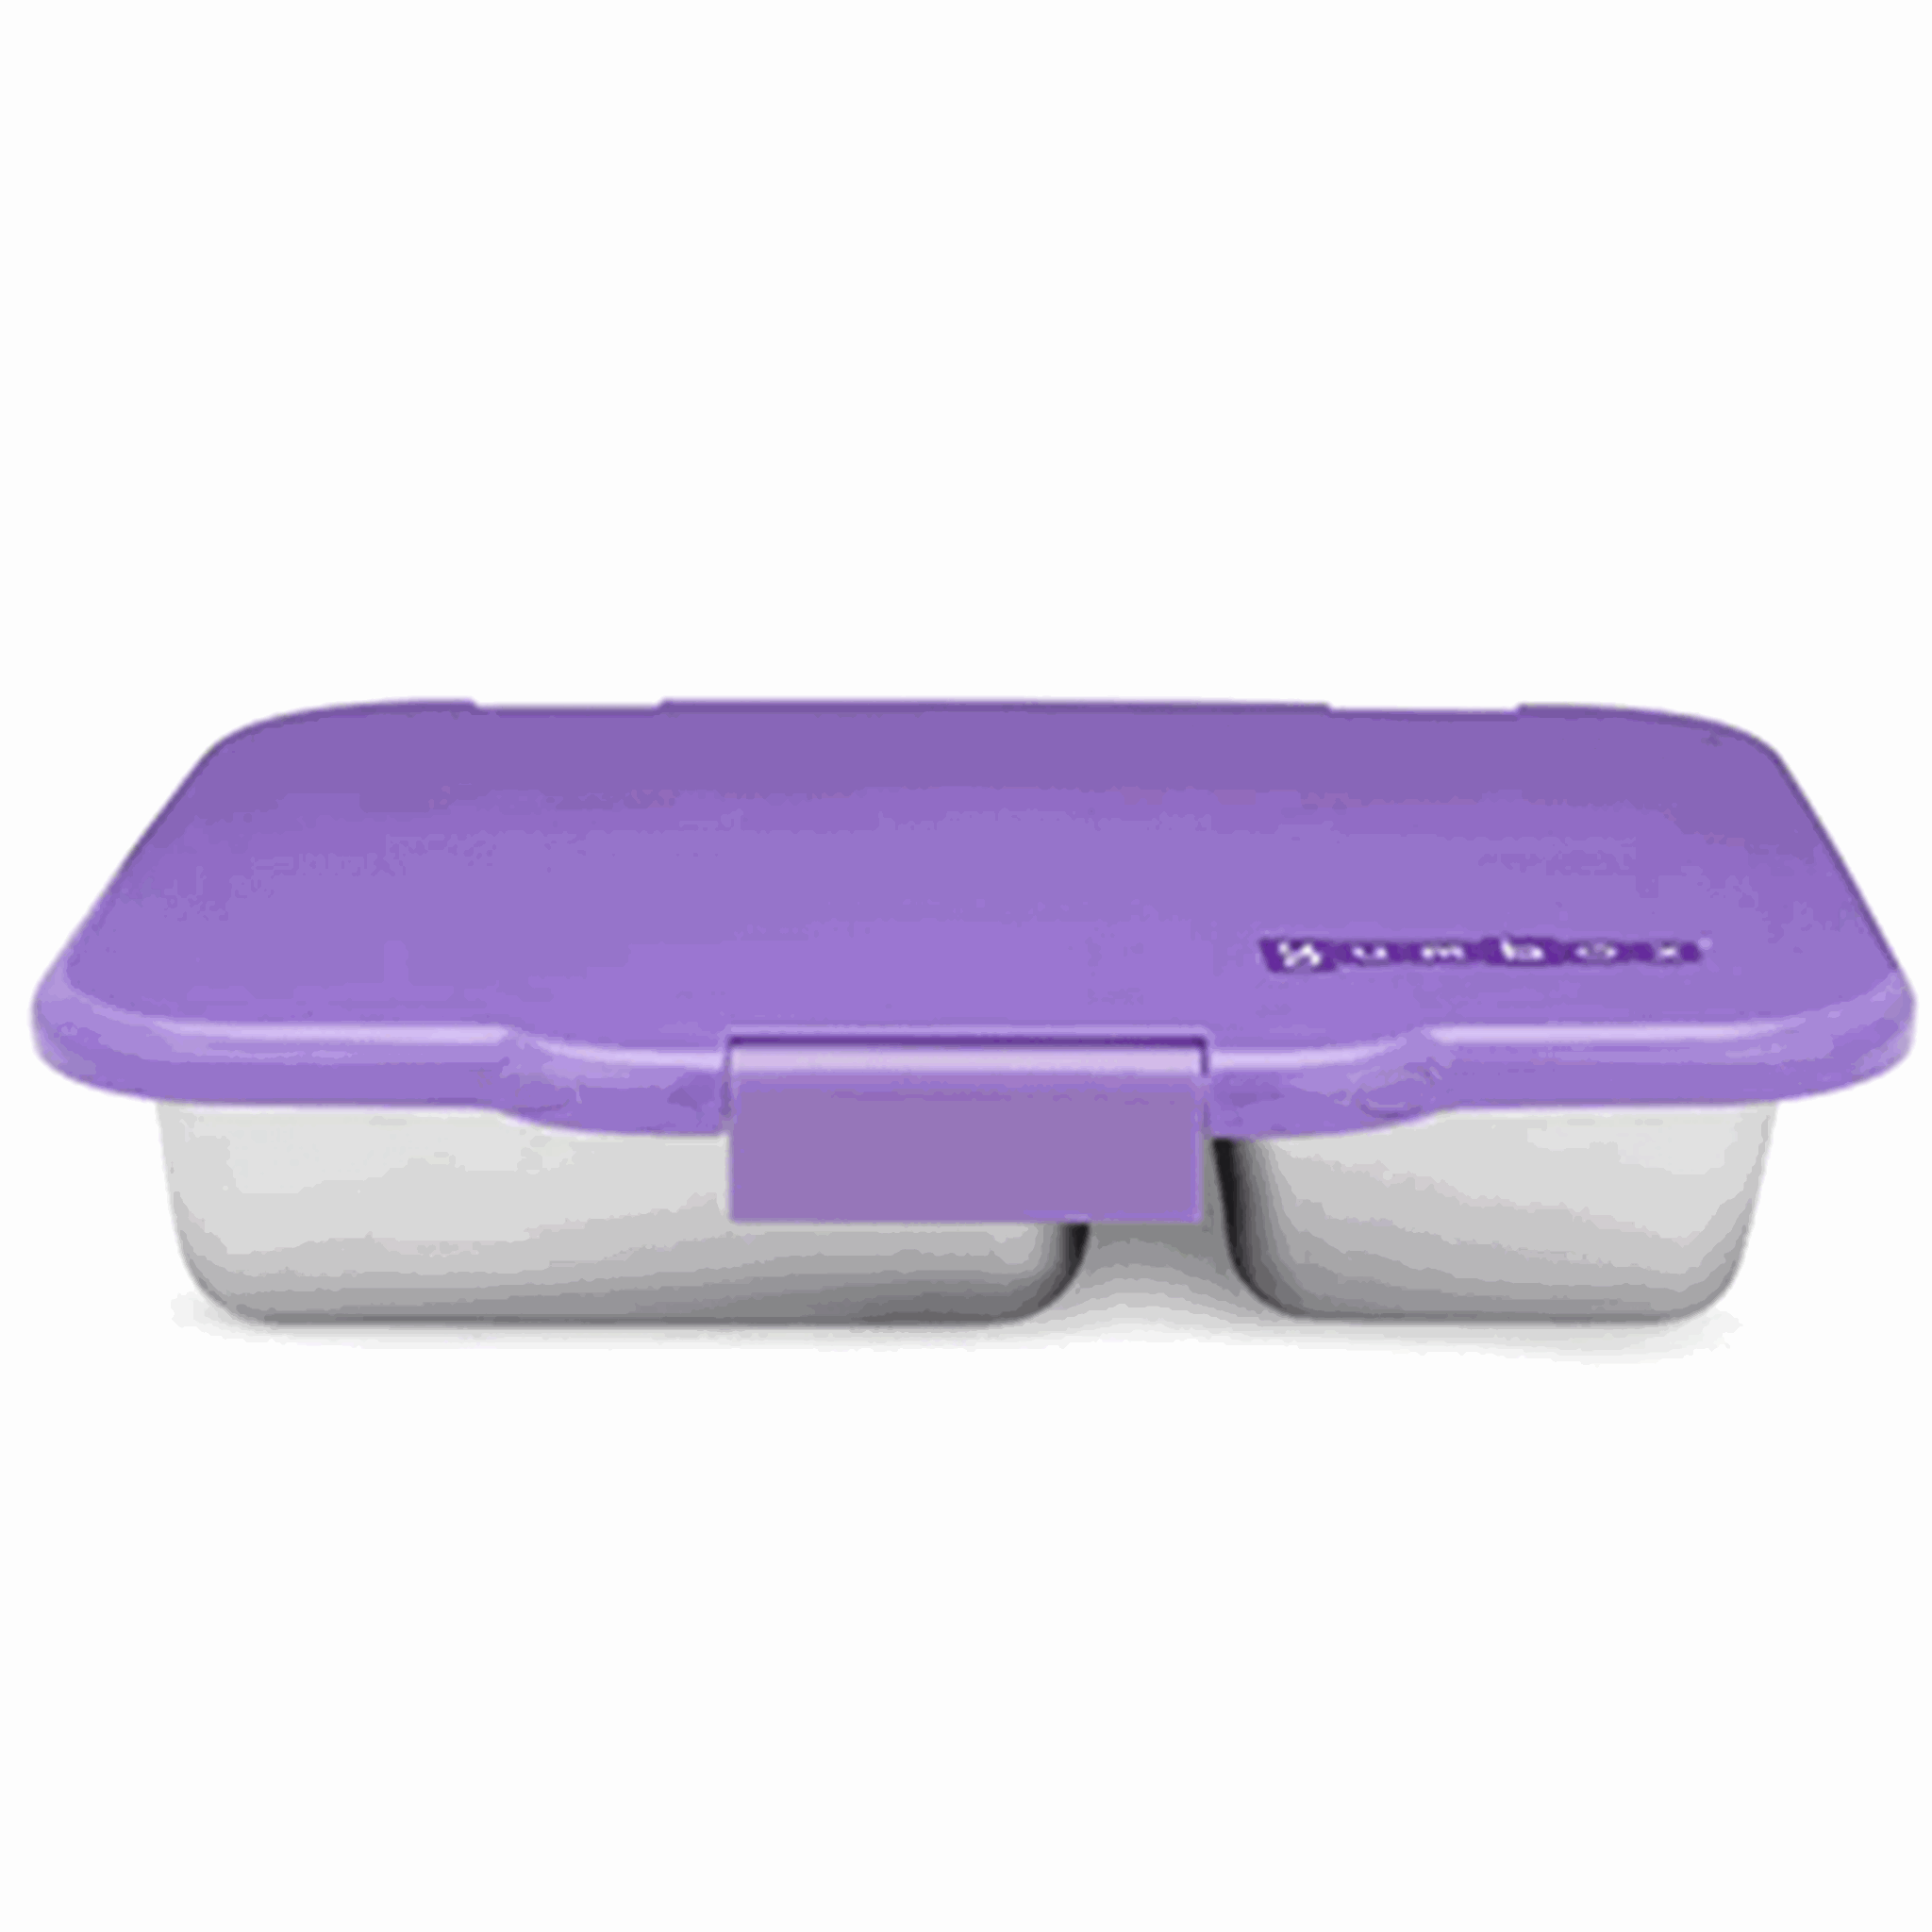 Yumbox Presto Stainless Steel Lunchlådor Remy Lavender 4